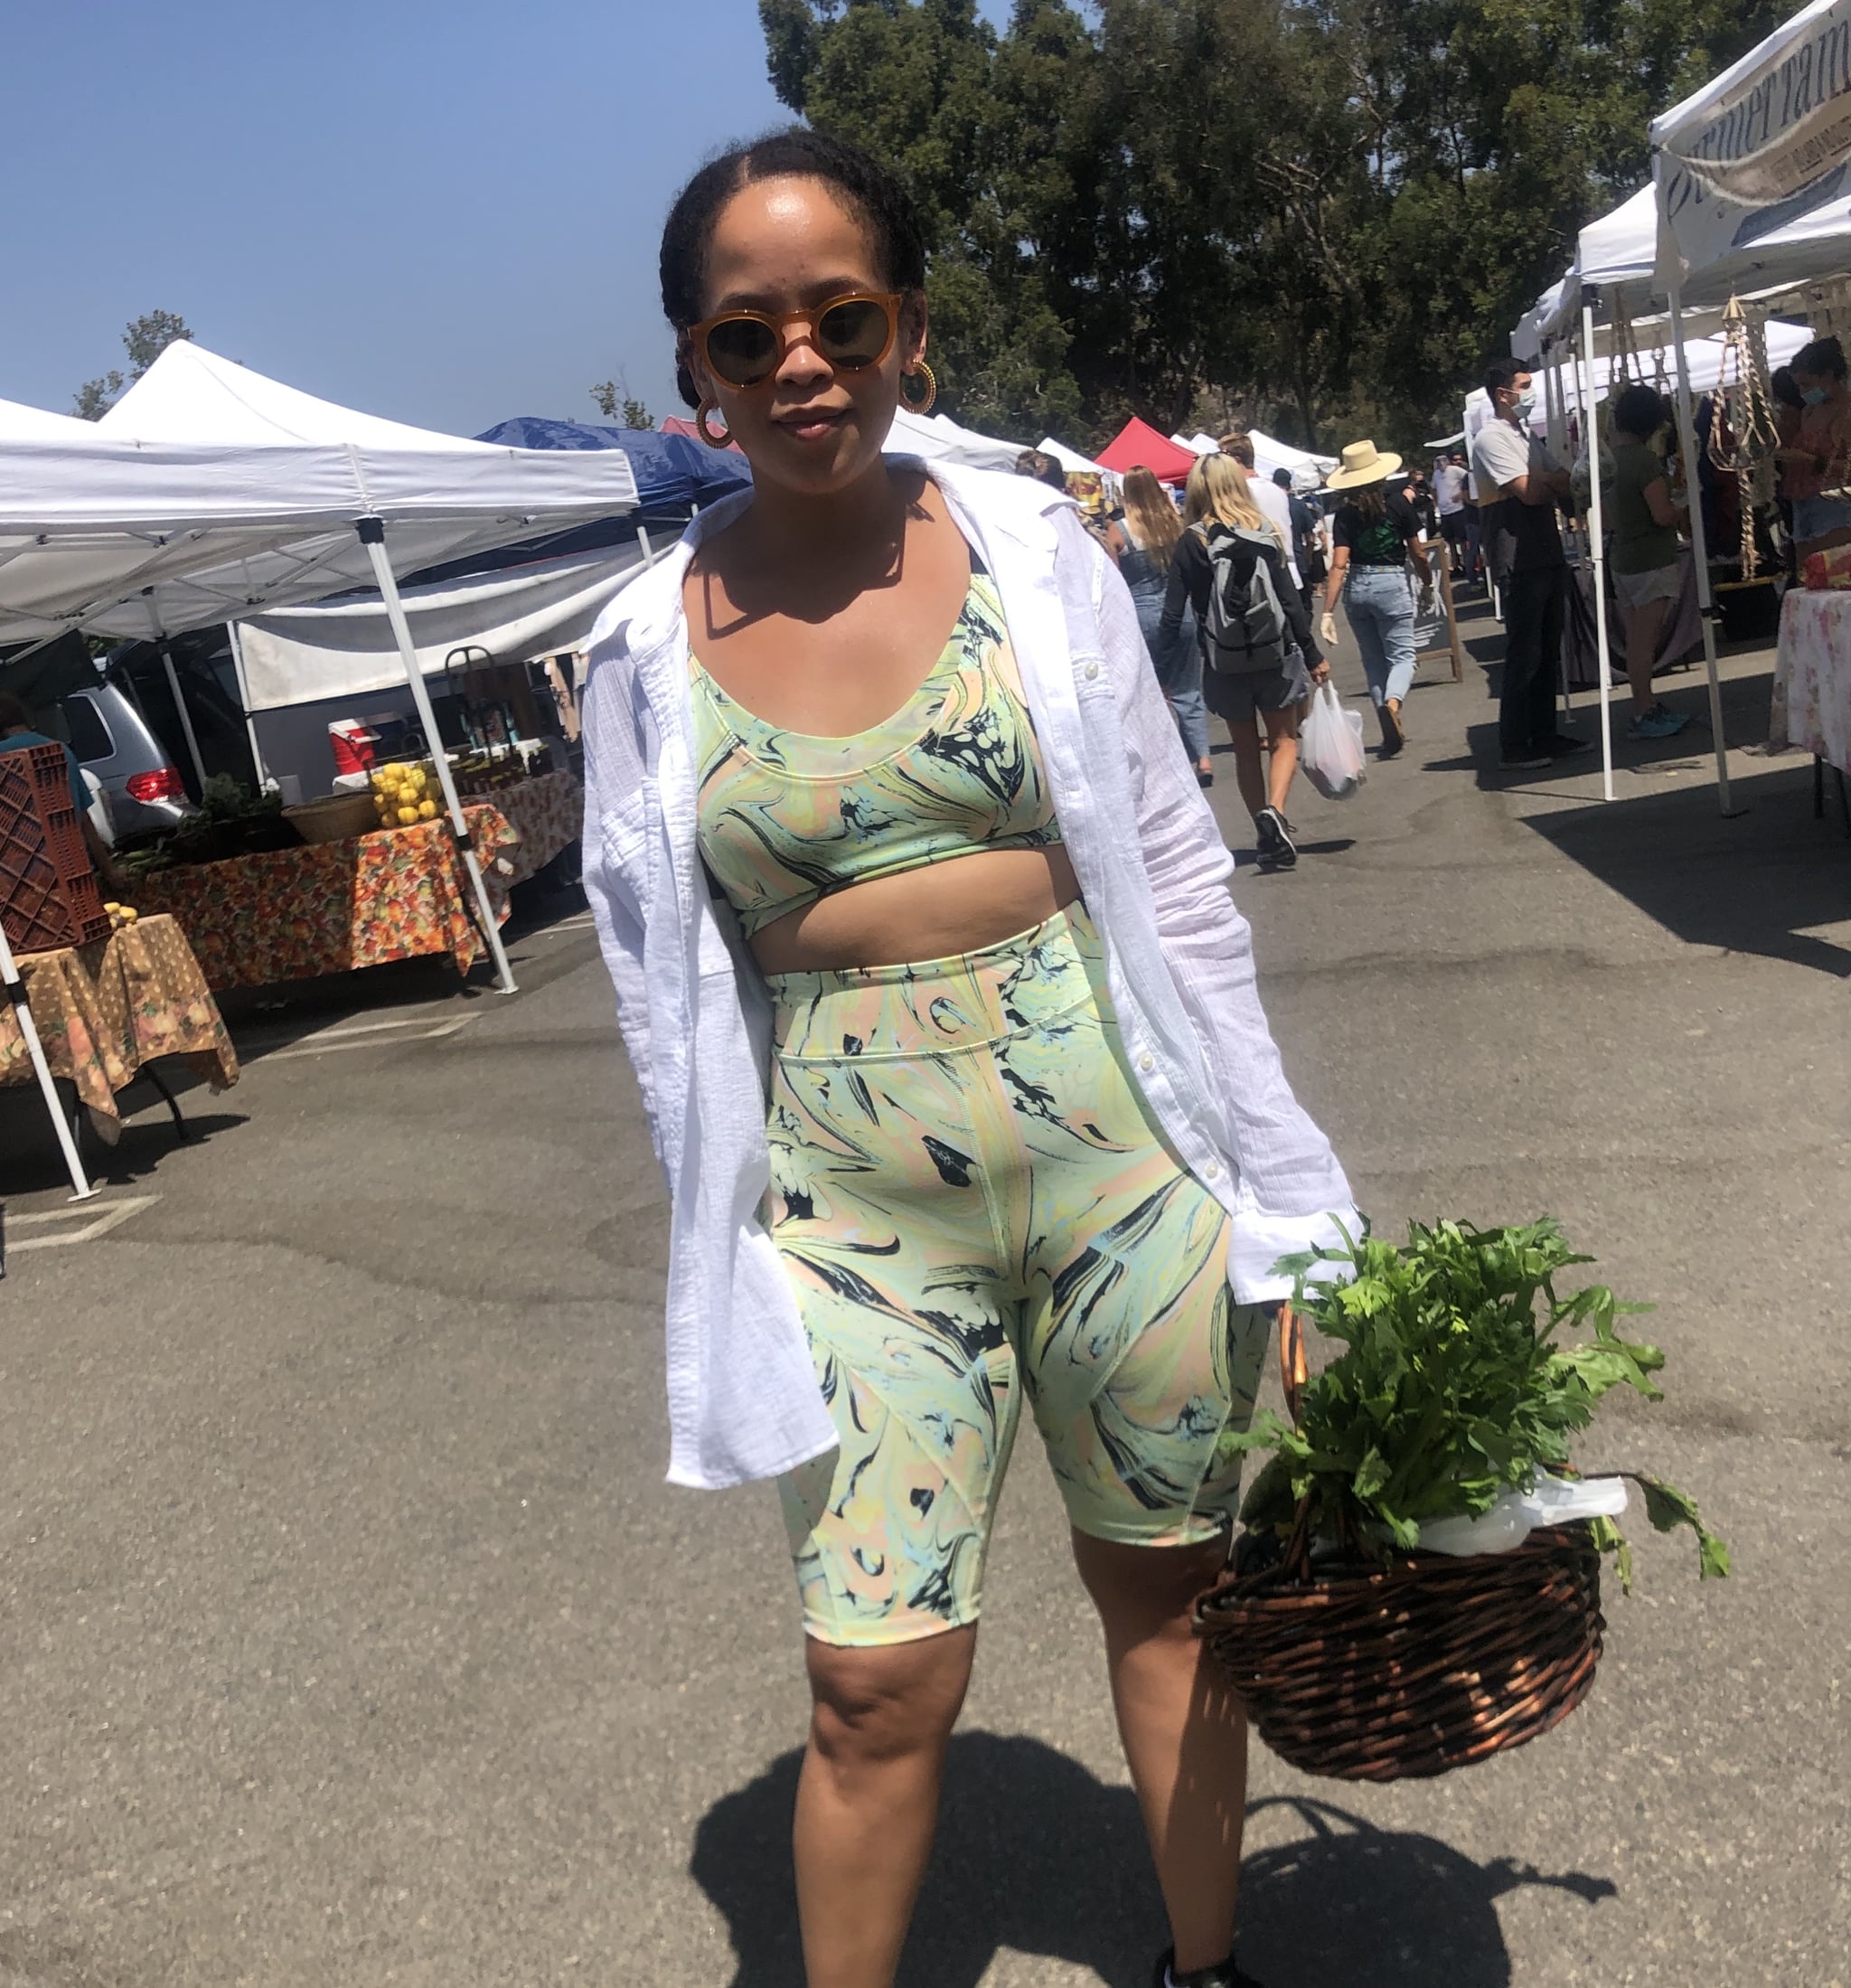 I picked up this set from Free People and I love it! The pattern is so summery and the fabric is stretchy enough to withstand the hardest of workouts or just a morning at the farmer's market.